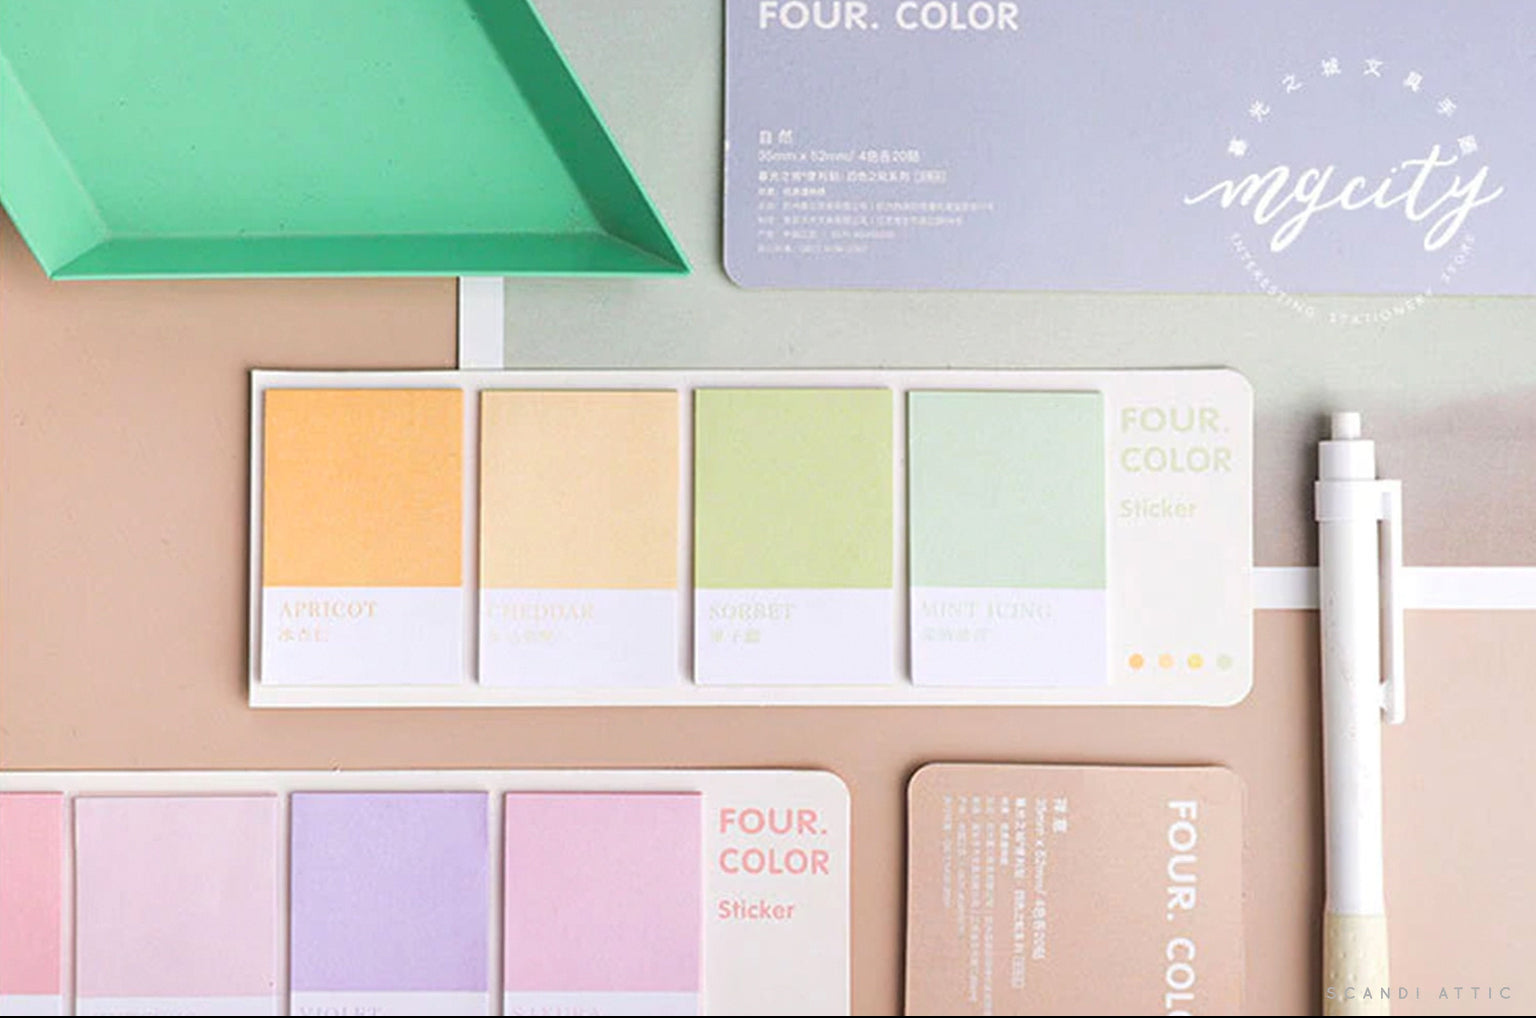 Post-it launches new sticky note colors with Pantone